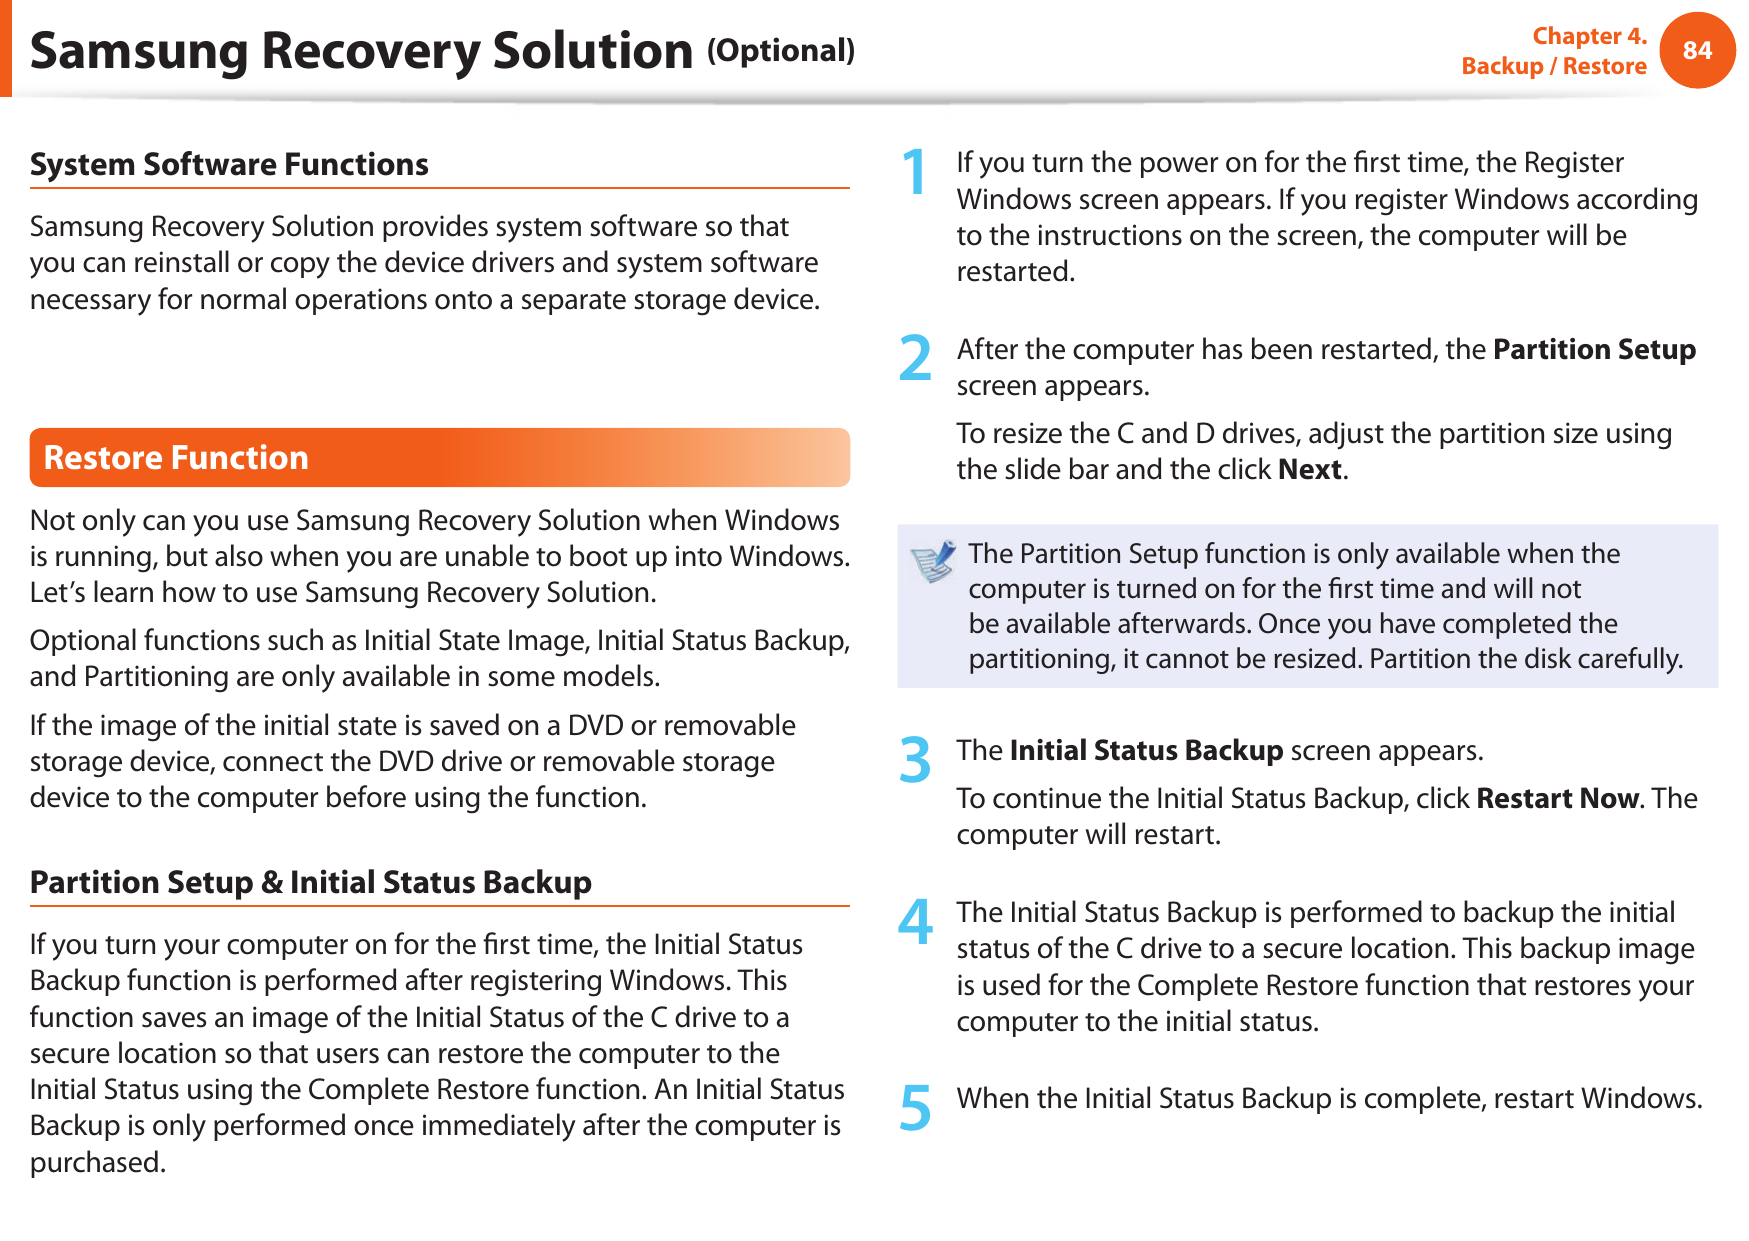 84Chapter 4.  Backup / RestoreSystem Software FunctionsSamsung Recovery Solution provides system software so that you can reinstall or copy the device drivers and system software necessary for normal operations onto a separate storage device.Restore FunctionNot only can you use Samsung Recovery Solution when Windows is running, but also when you are unable to boot up into Windows. Let’s learn how to use Samsung Recovery Solution.Optional functions such as Initial State Image, Initial Status Backup, and Partitioning are only available in some models.If the image of the initial state is saved on a DVD or removable storage device, connect the DVD drive or removable storage device to the computer before using the function.Partition Setup &amp; Initial Status BackupIf you turn your computer on for the  rst time, the Initial Status Backup function is performed after registering Windows. This function saves an image of the Initial Status of the C drive to a secure location so that users can restore the computer to the Initial Status using the Complete Restore function. An Initial Status Backup is only performed once immediately after the computer is purchased.1  If you turn the power on for the  rst time, the Register Windows screen appears. If you register Windows according to the instructions on the screen, the computer will be restarted.2  After the computer has been restarted, the Partition Setup screen appears. To resize the C and D drives, adjust the partition size using the slide bar and the click Next.The Partition Setup function is only available when the computer is turned on for the  rst time and will not be available afterwards. Once you have completed the partitioning, it cannot be resized. Partition the disk carefully.3  The Initial Status Backup screen appears. To continue the Initial Status Backup, click Restart Now. The computer will restart.4  The Initial Status Backup is performed to backup the initial status of the C drive to a secure location. This backup image is used for the Complete Restore function that restores your computer to the initial status.5  When the Initial Status Backup is complete, restart Windows.Samsung Recovery Solution (Optional)